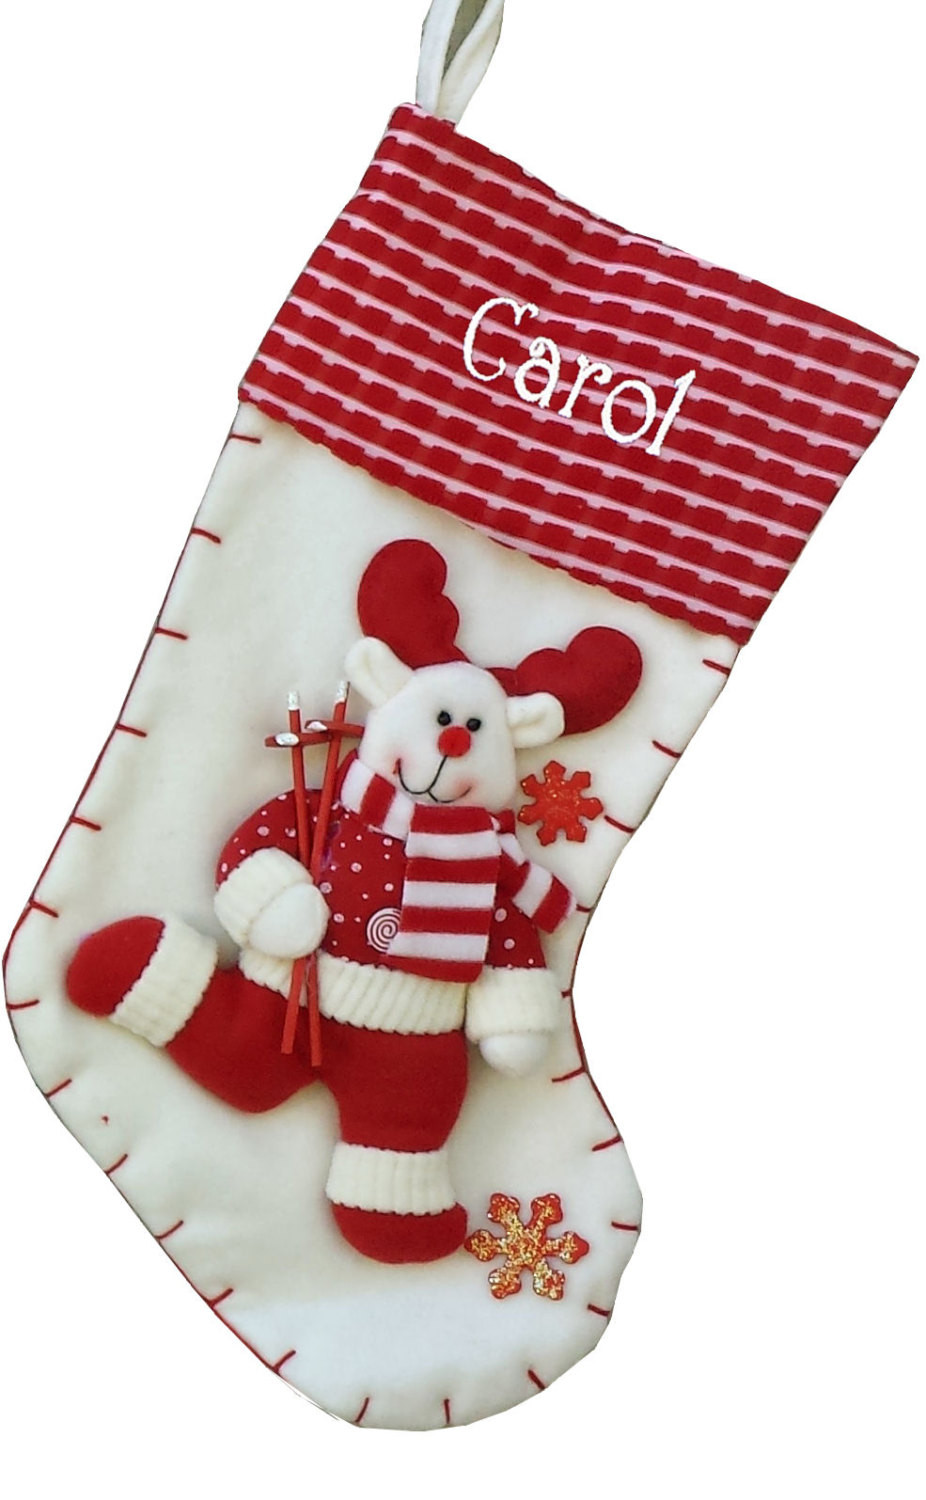 Candy Cane Christmas Stockings
 19" Red and White Candy Cane Like Reindeer Christmas Stocking